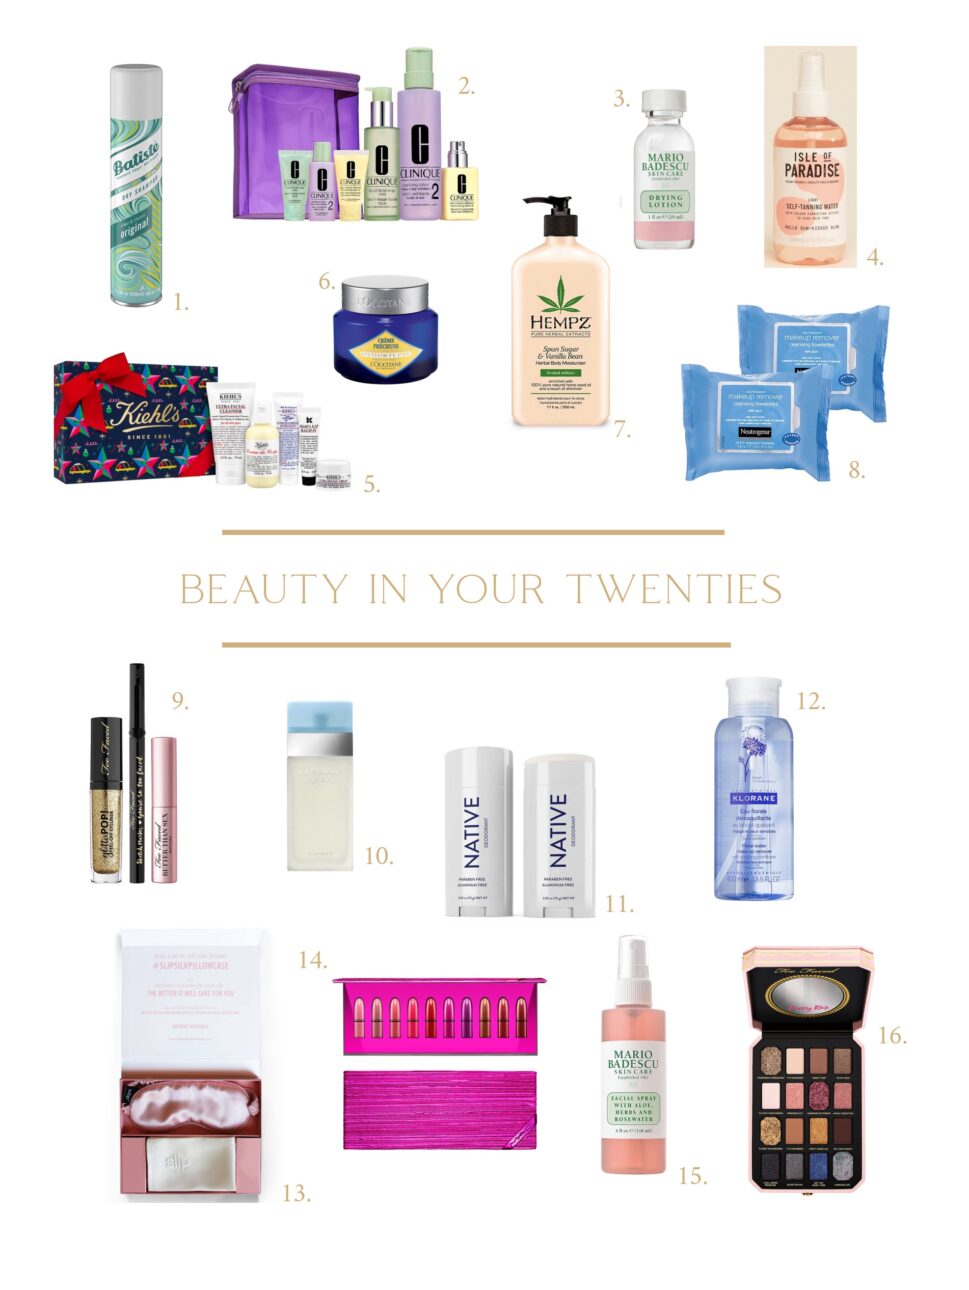 The Best Beauty Gift Ideas for Women in their 20s - Karina Style